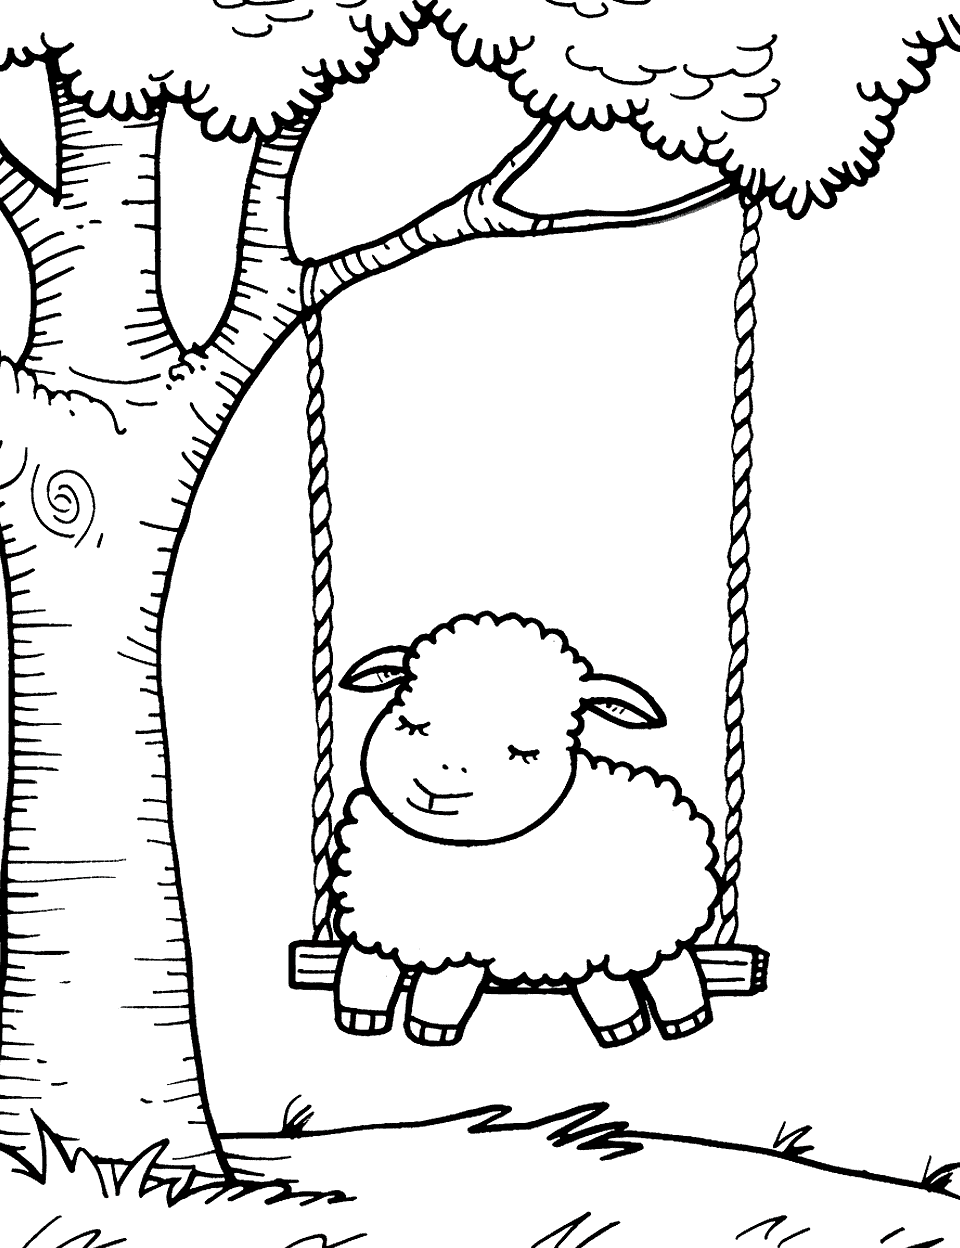 Sheep on a Swing Coloring Page - A sheep swinging gently under a large tree.